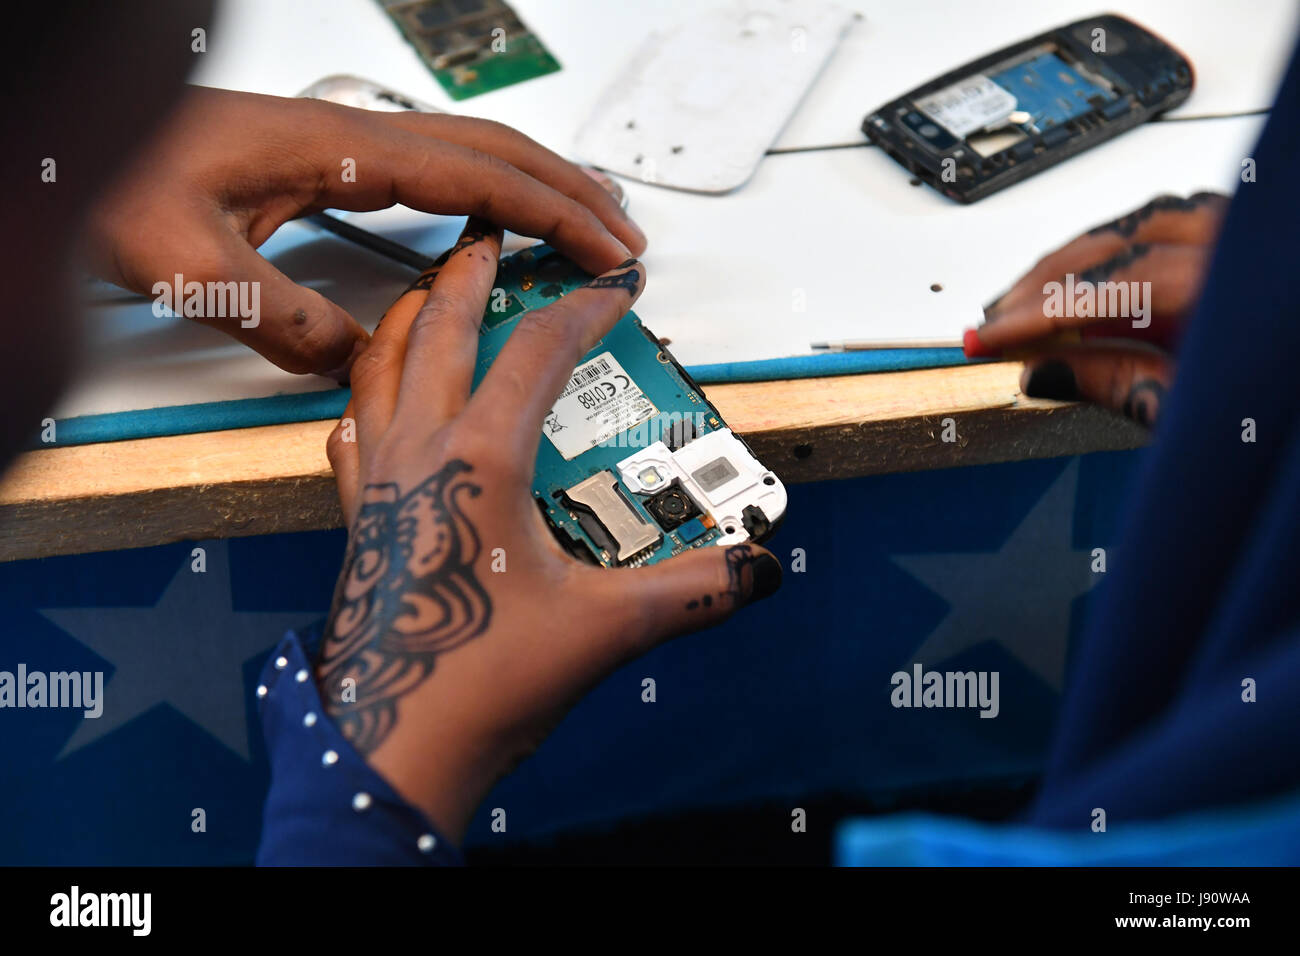 (170531) -- MOGADISHU, May 31, 2017 (Xinhua) -- Trainees practice mobile phone repairing at the training centre ELMAN, a non-government organization (NGO) which cooperates with the United Nations Children's Fund (UNICEF), in Mogadishu, Somalia, March 22, 2017. By the year of 2017, more than 1630 children and teenagers have taken vocational training courses such as automobile maintenance, basic electricity knowledge and circuit maintenance skills, mobile phone repairing and computer using. A vast majority of the students here were former child soldiers or affected by armed groups. The knowledge Stock Photo